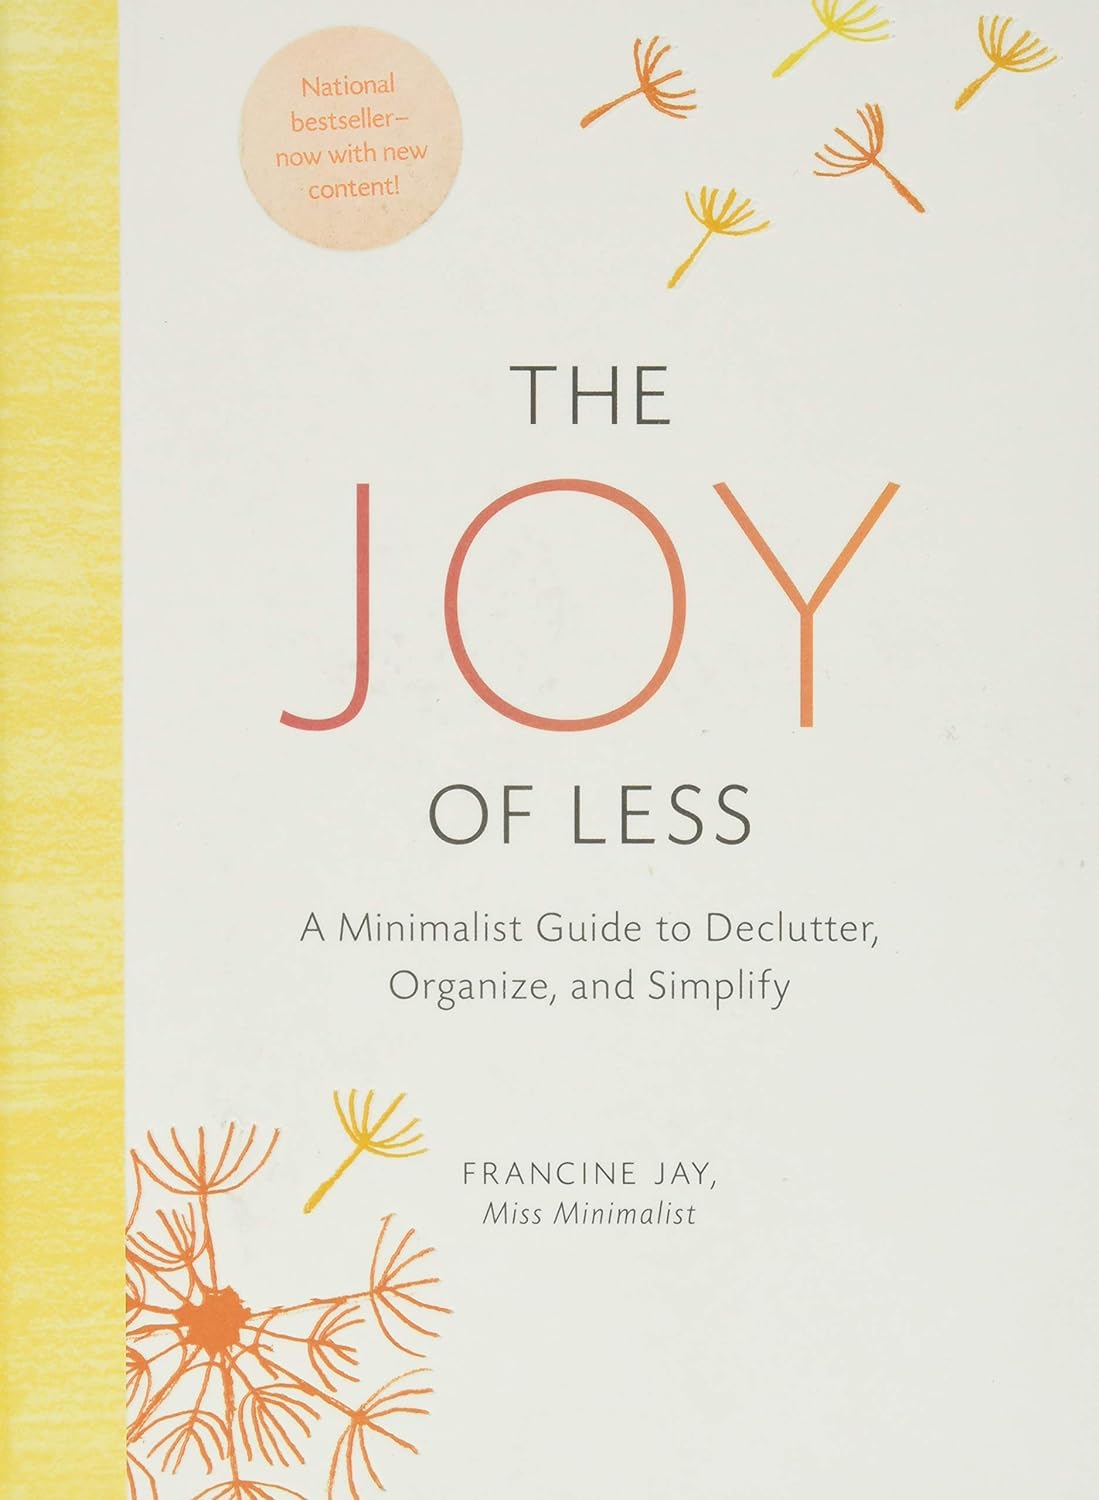 the joy of less by francine jay.